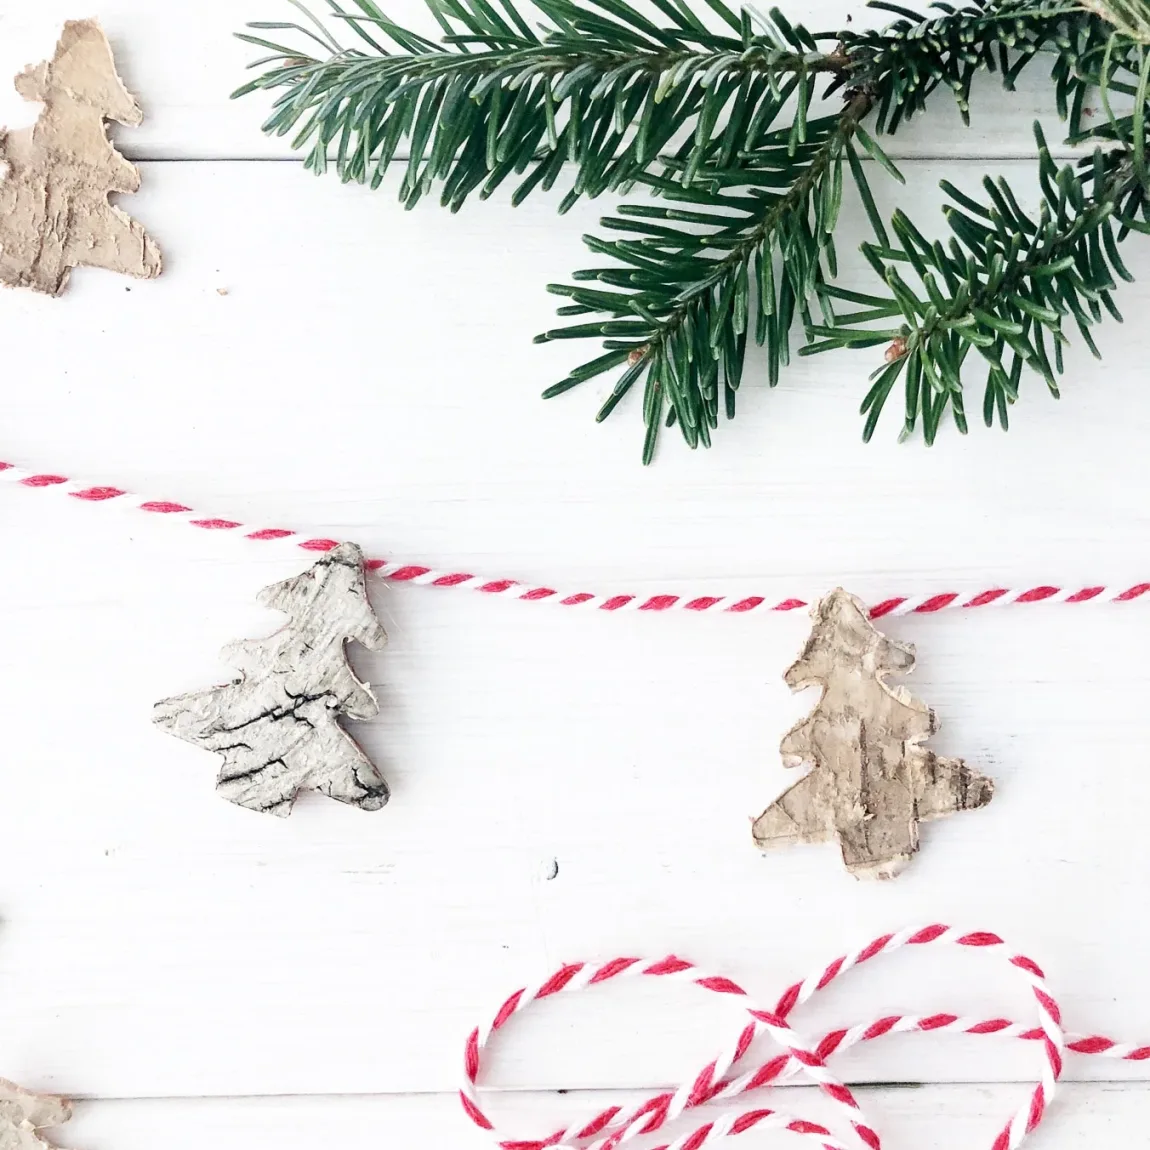 Farmhouse Chic: Natural Christmas Decor Ideas. Embrace farmhouse style with these natural decor ideas for a cozy and inviting holiday season. Bring the outdoors in with rustic charm.
